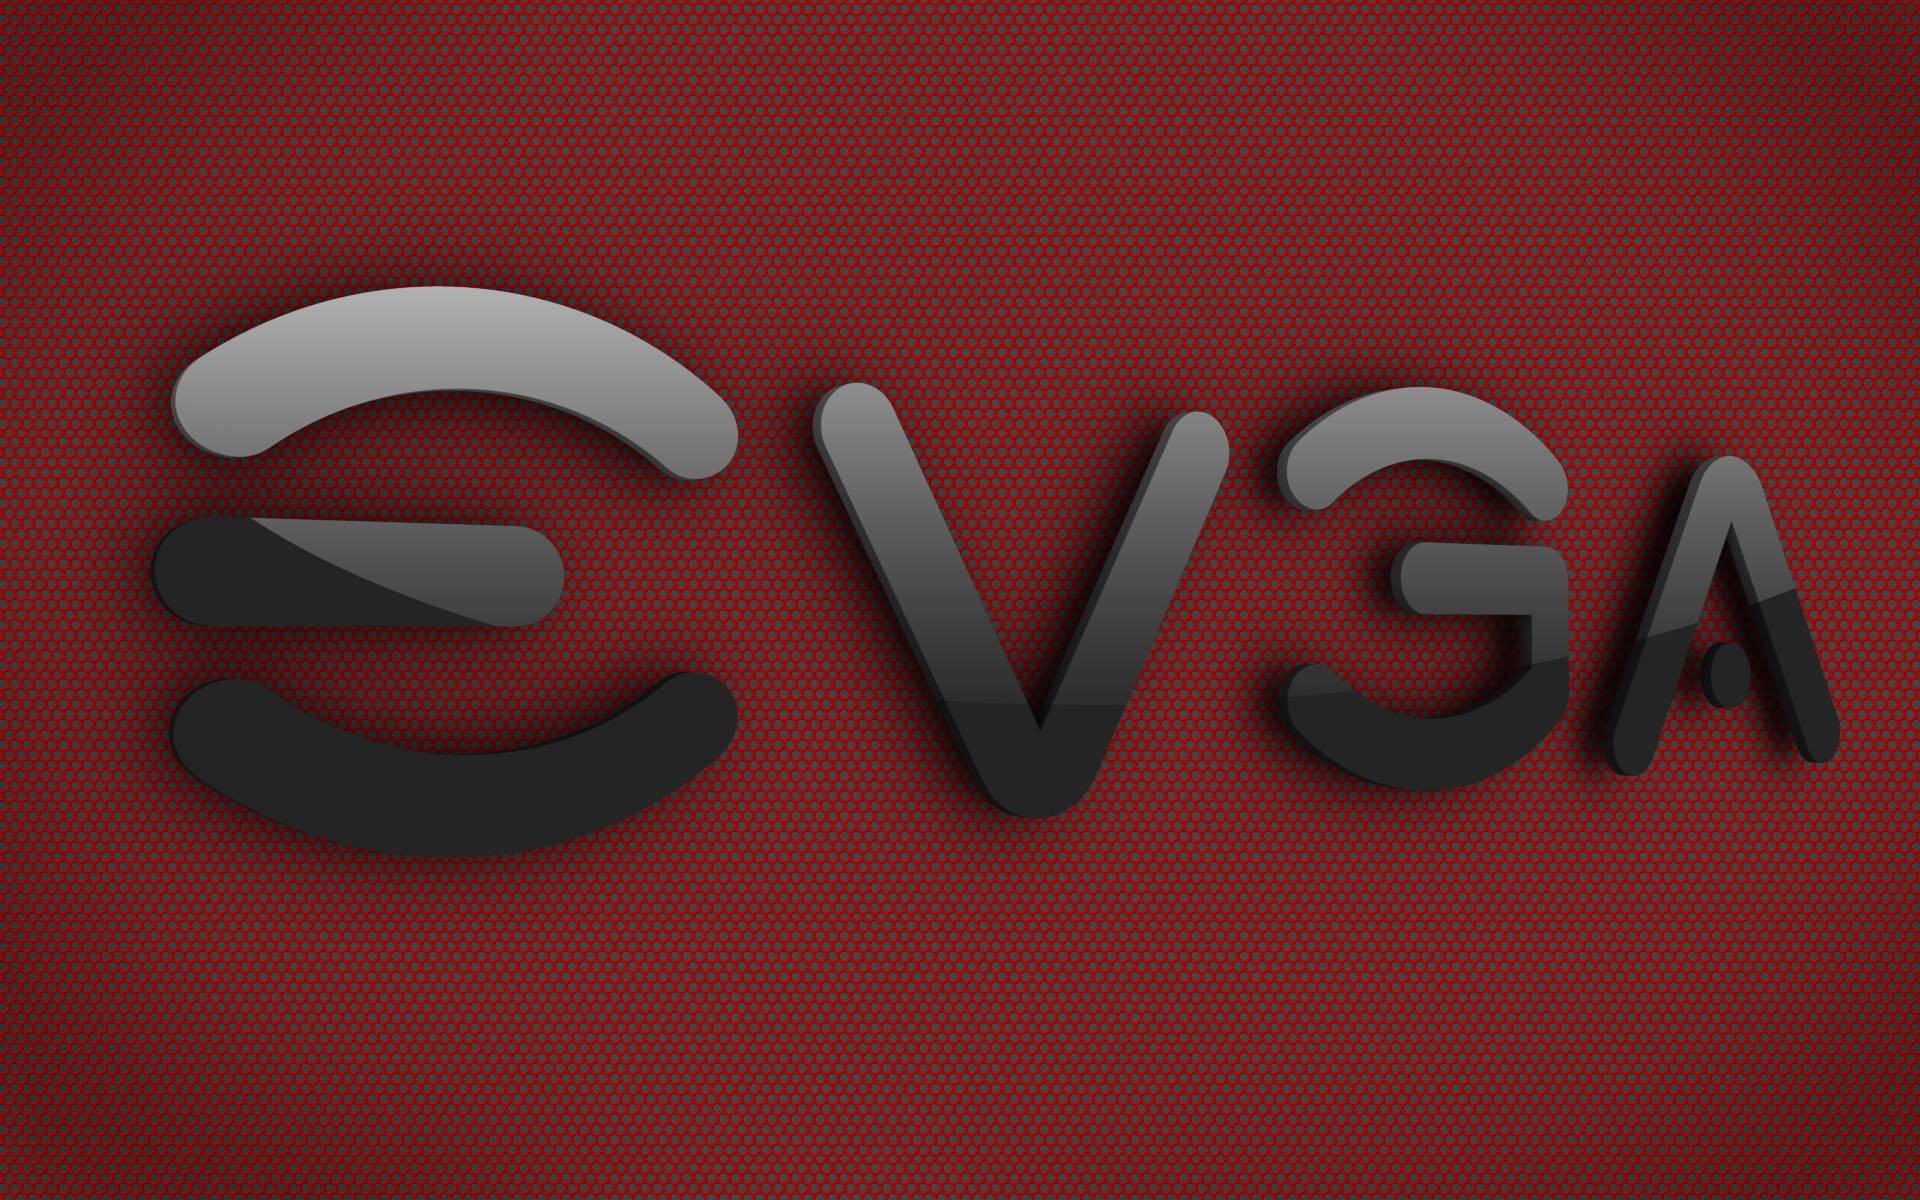 1920x1200 Evga Wallpapers - Full HD wallpaper search - page 2